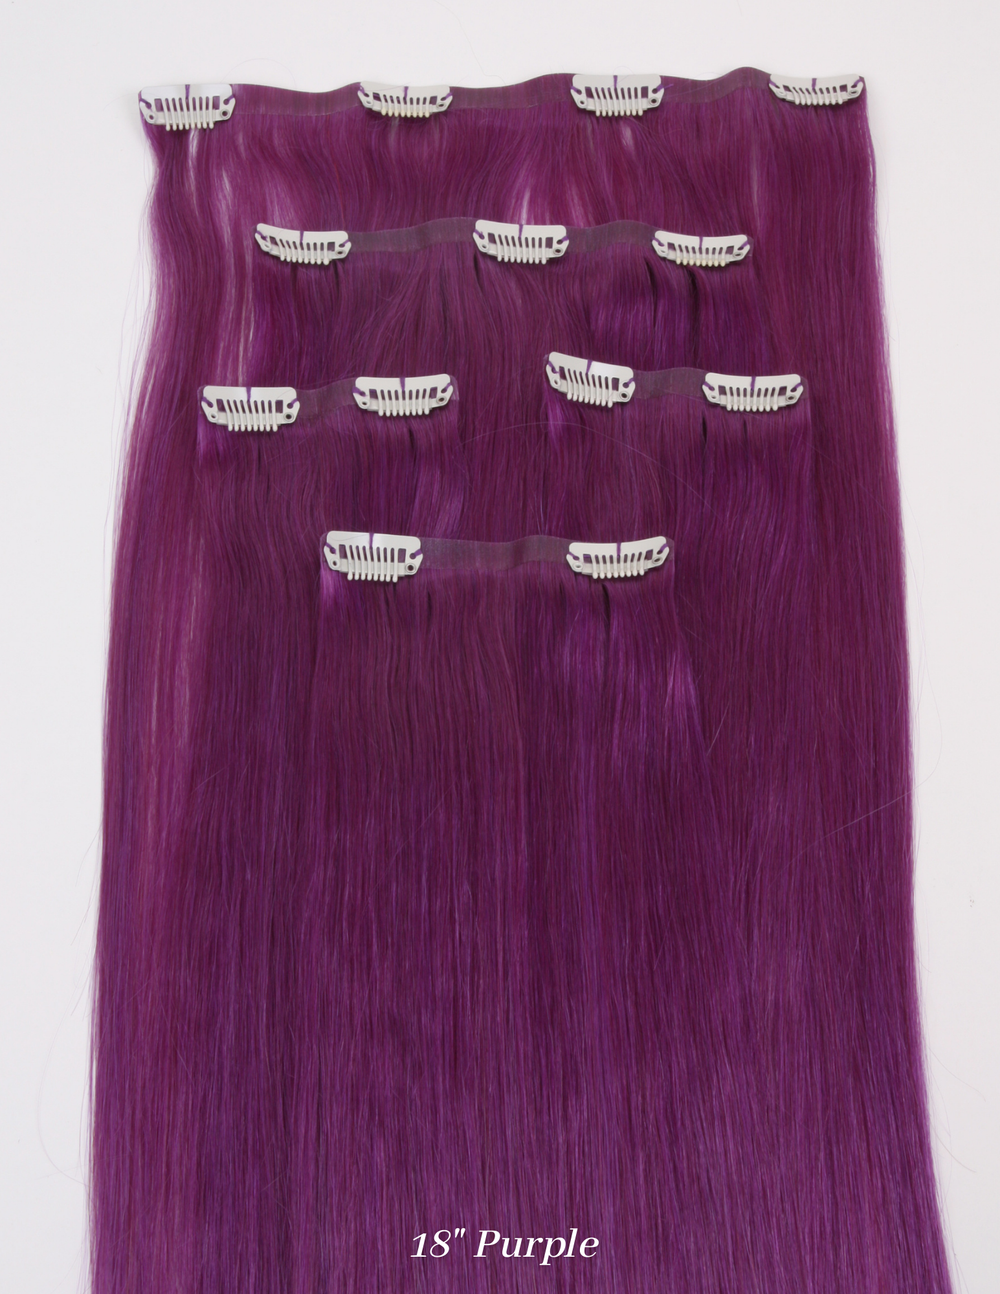 18 Ultra-Seamless Clip-in Hair Extensions Platinum